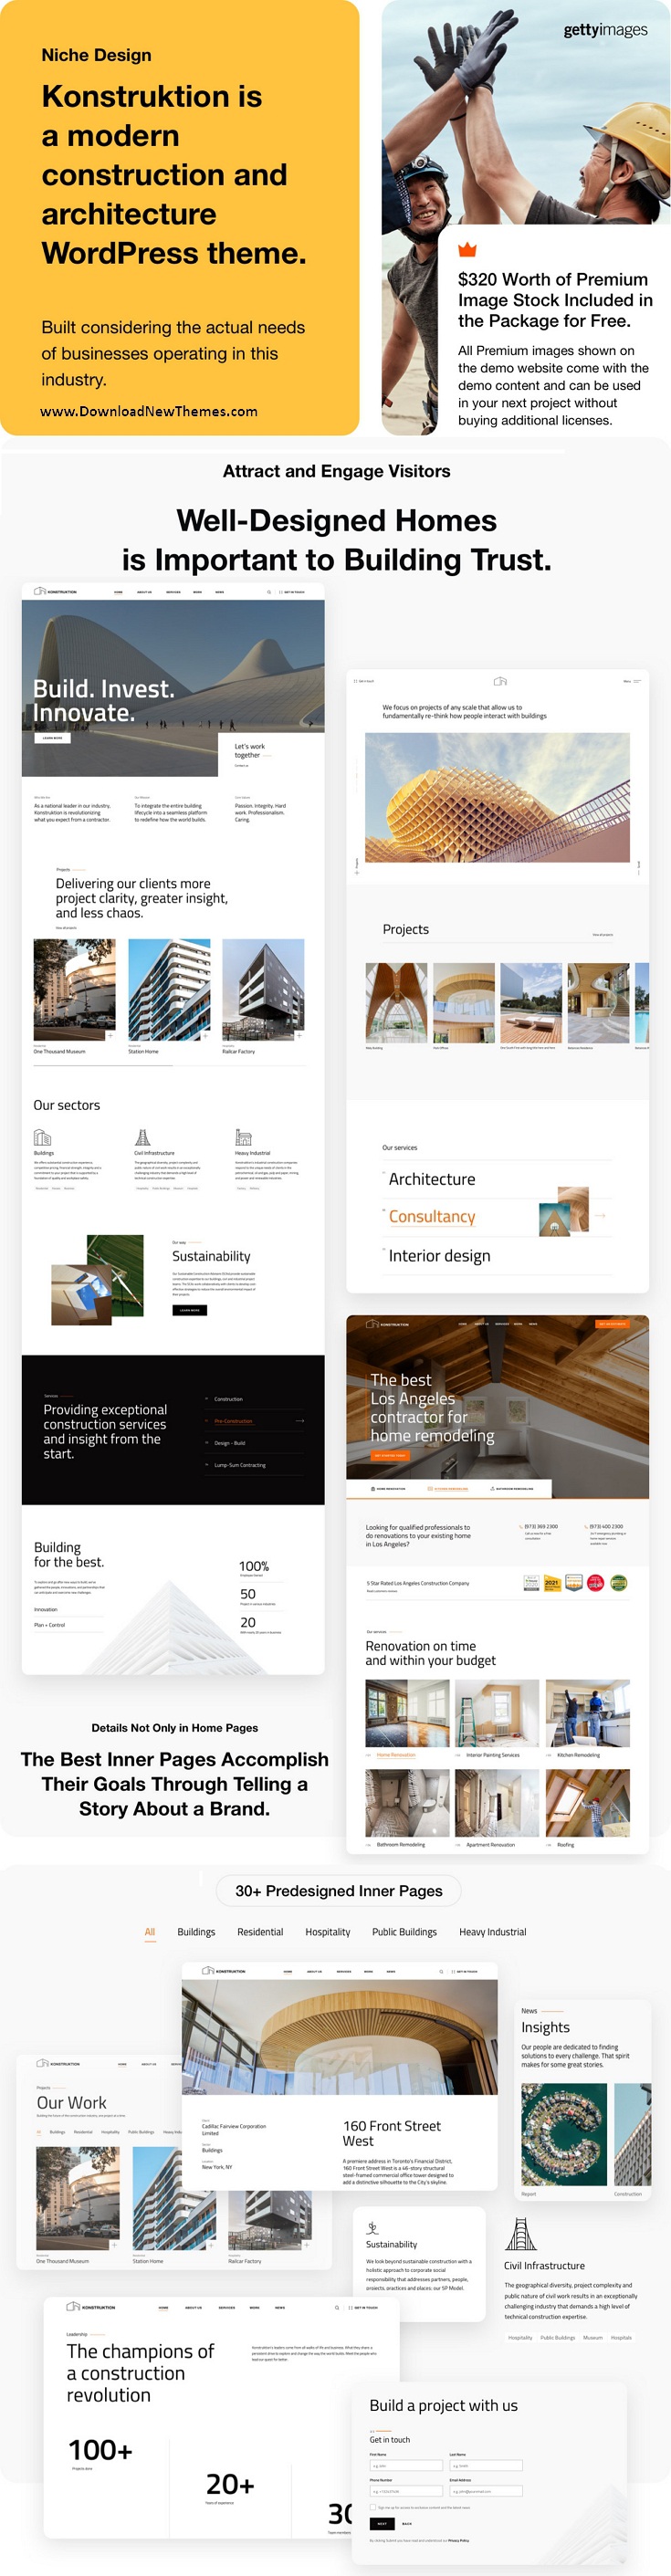 Konstruktion - Construction and Architecture WordPress Theme Review